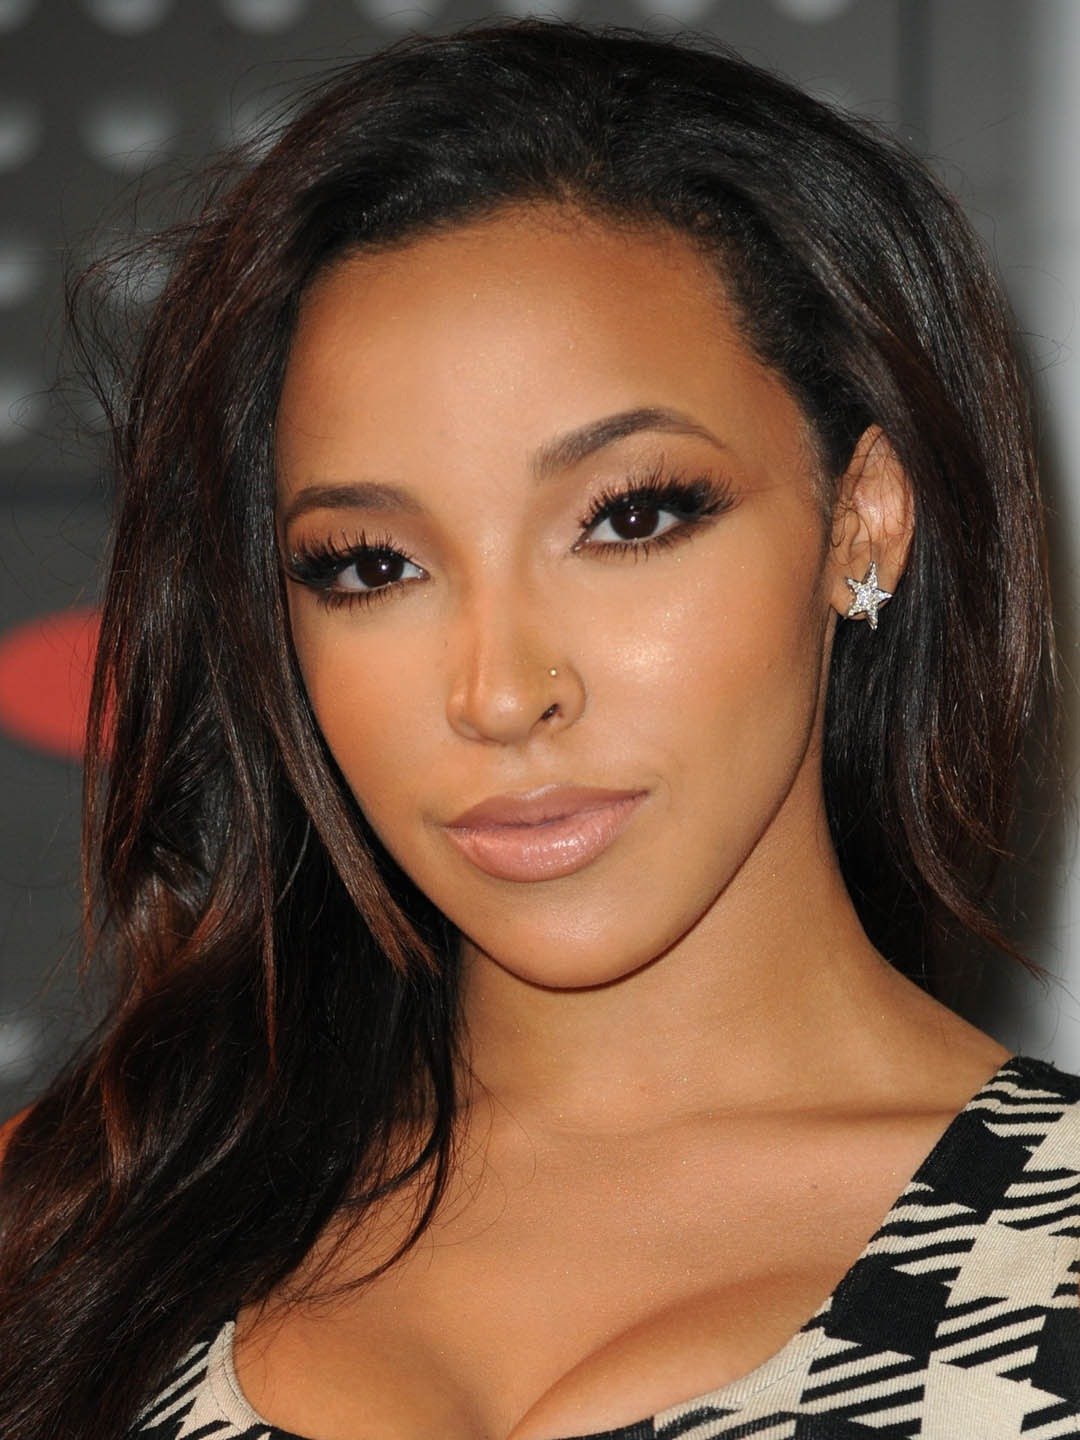 How tall is Tinashe?